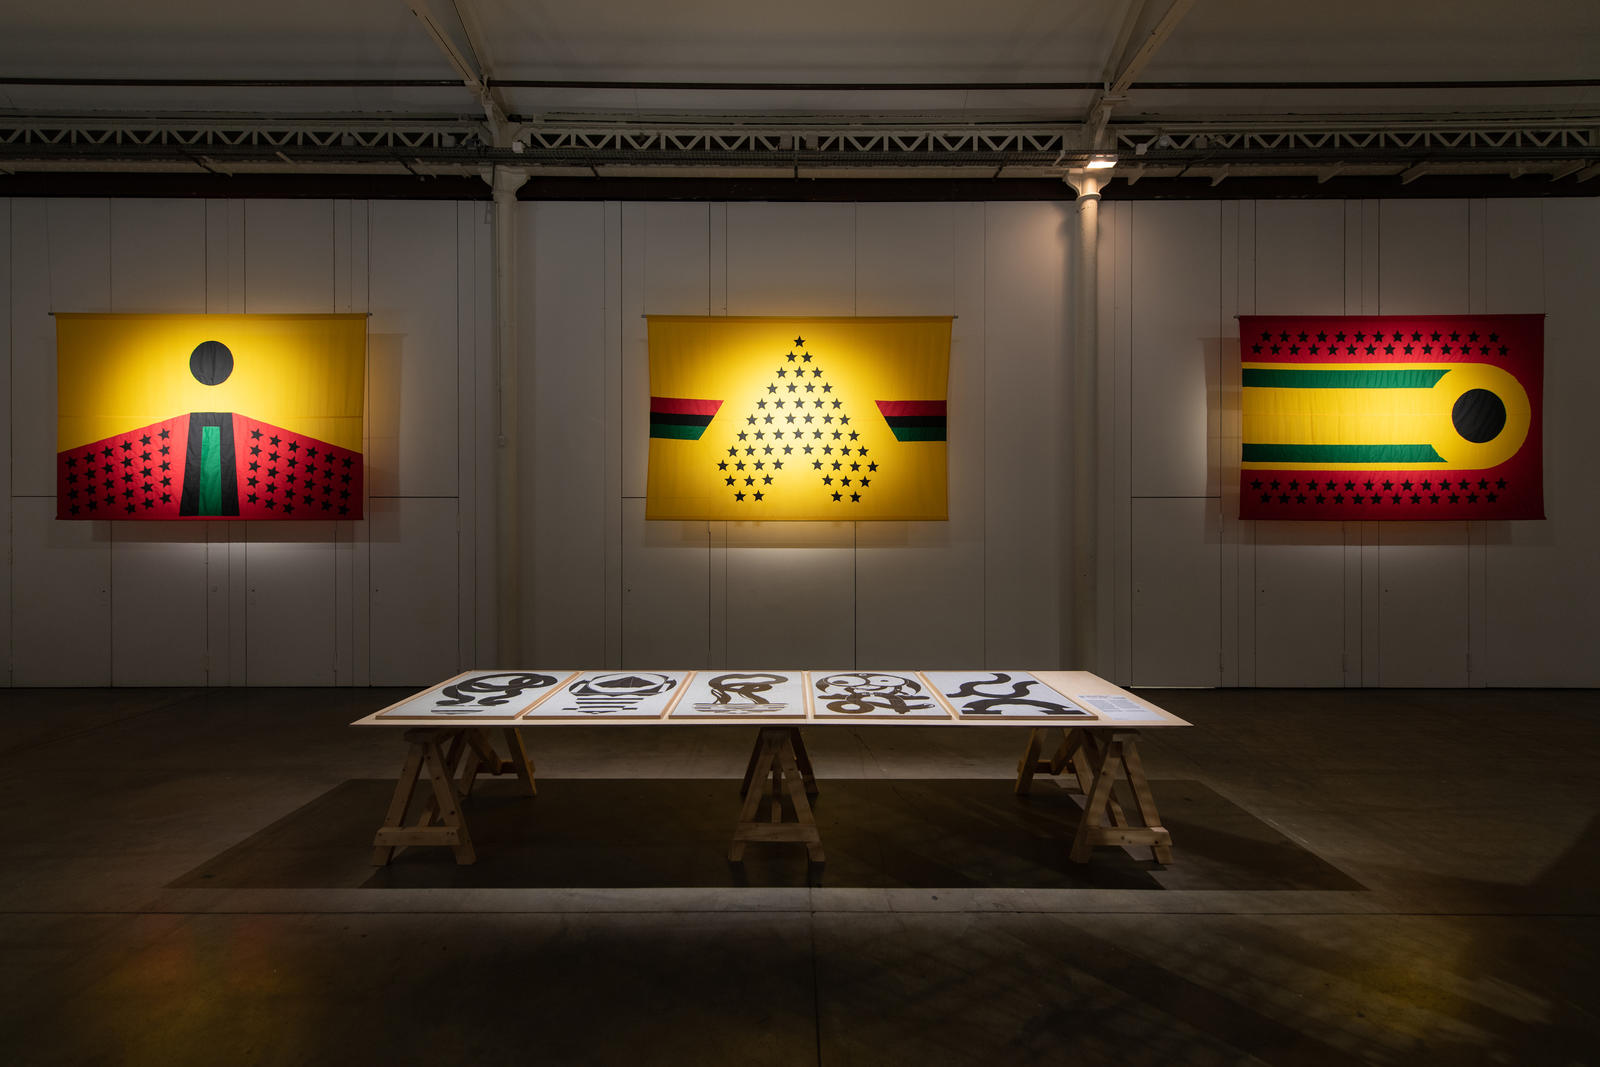 African Artist Spotlight Series: The Multidisciplinary Approach of Larry Achiampong | Pan African Flag For The Relic Travellers’ Alliance, Ascension (2017), Squadron (2018), Motion (2018) © Larry Achiampong